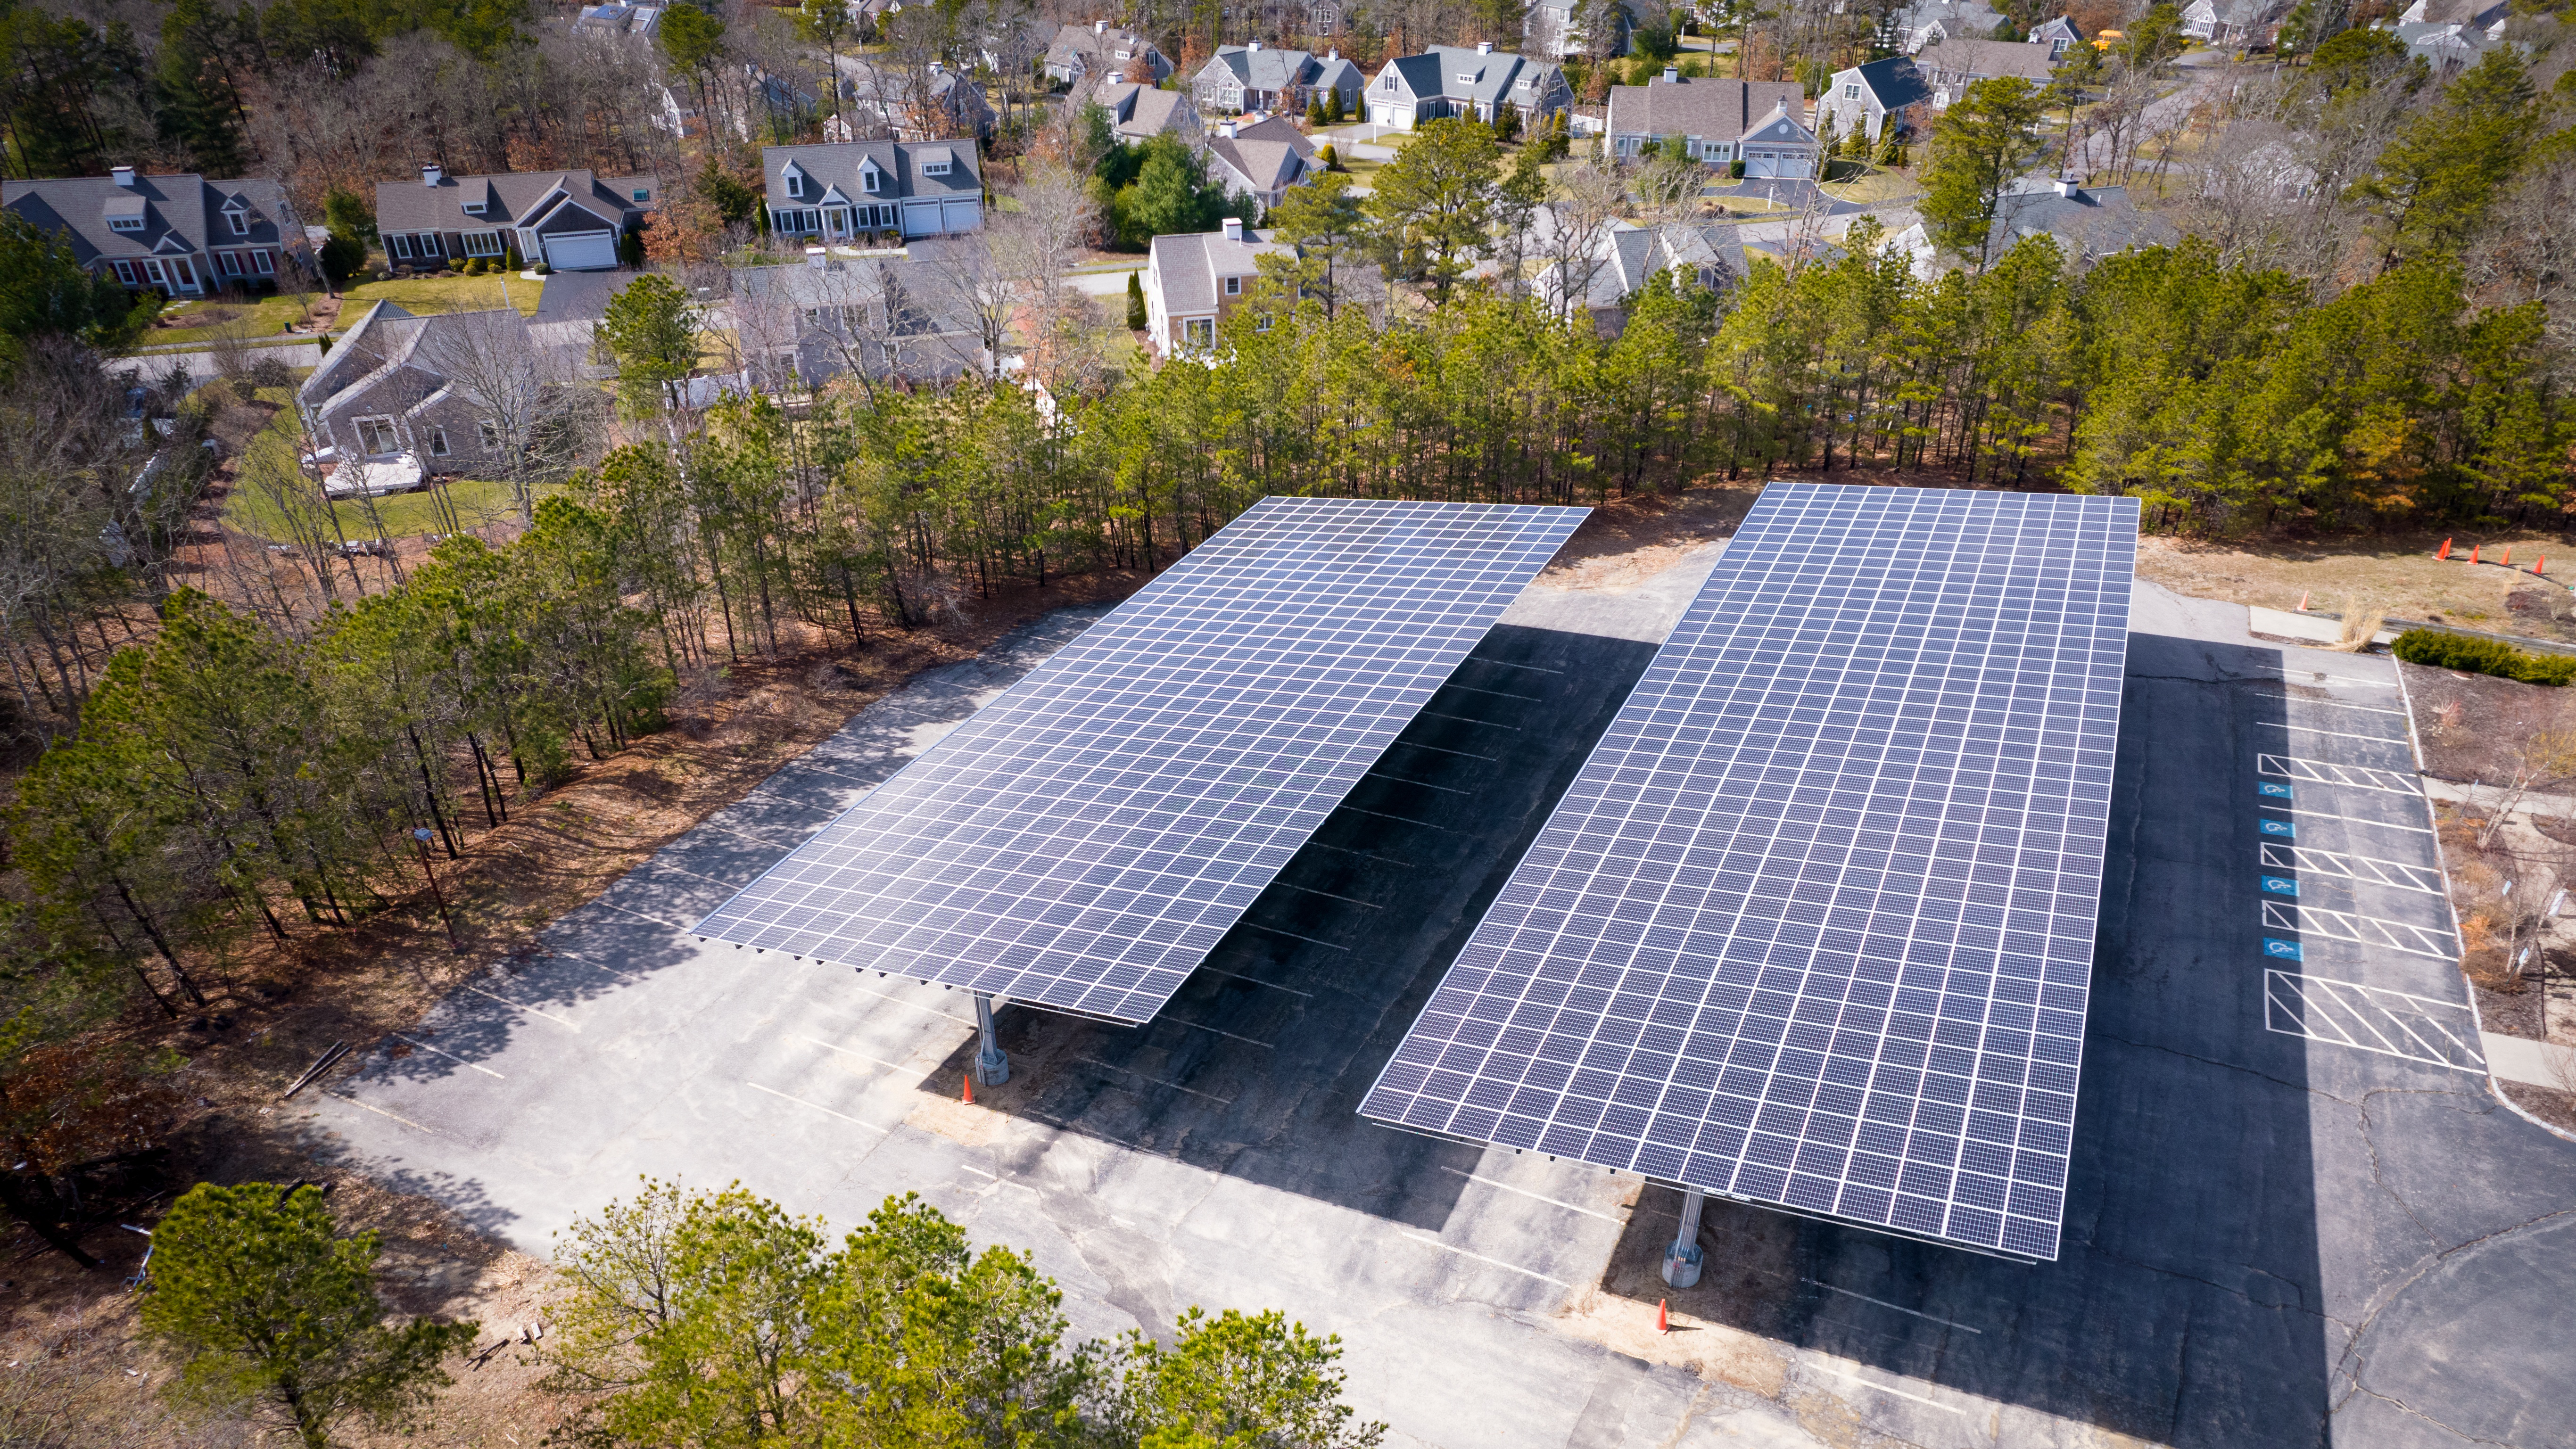 Polar Racking and Ecogy Energy Complete Construction on Solar Carport Project in Massachusetts